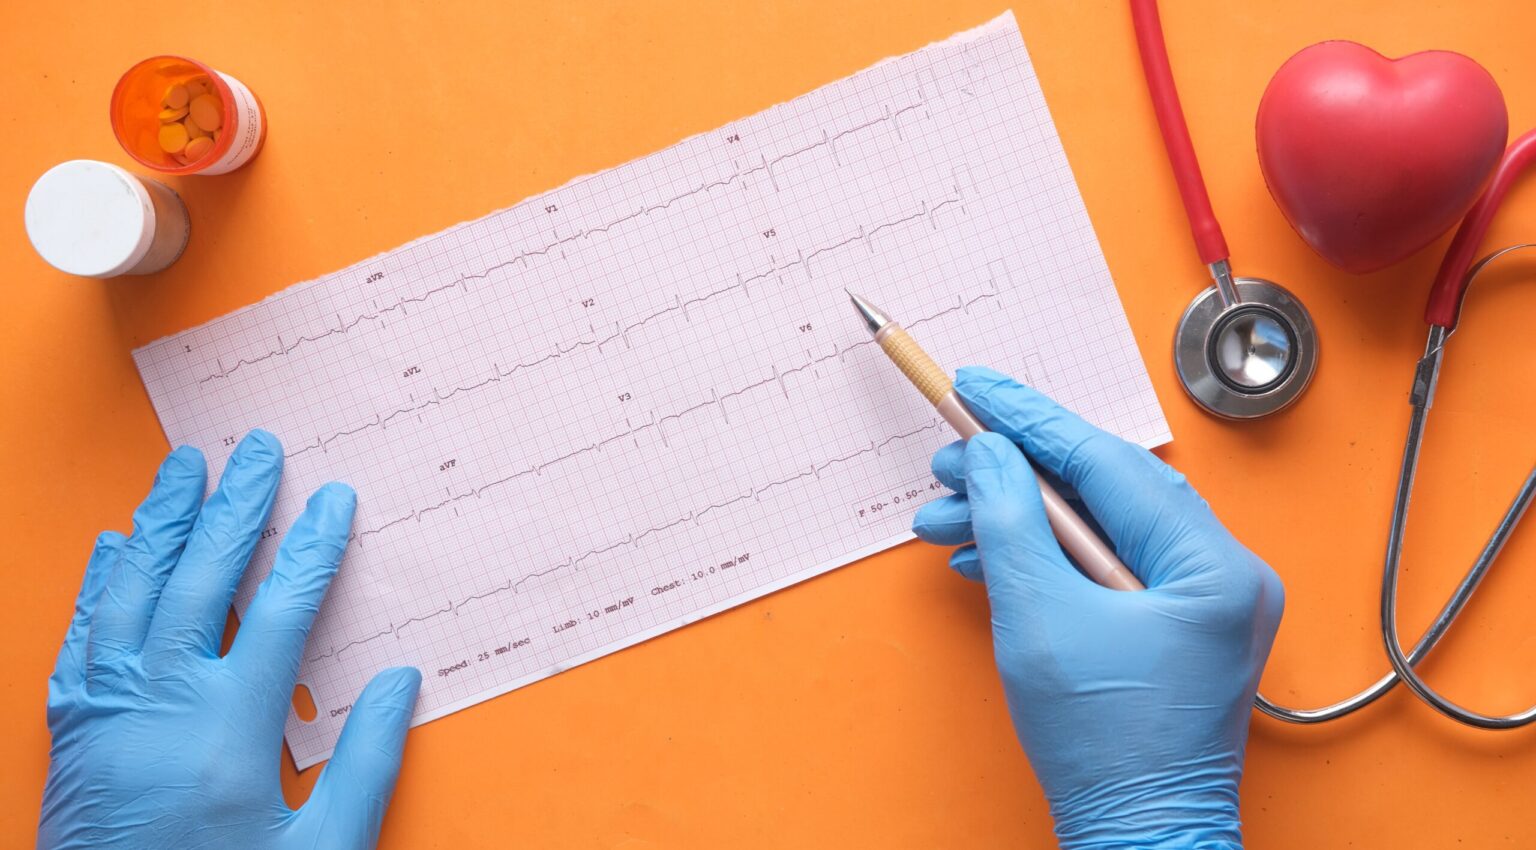 A doctor analyzing heart rate medical records